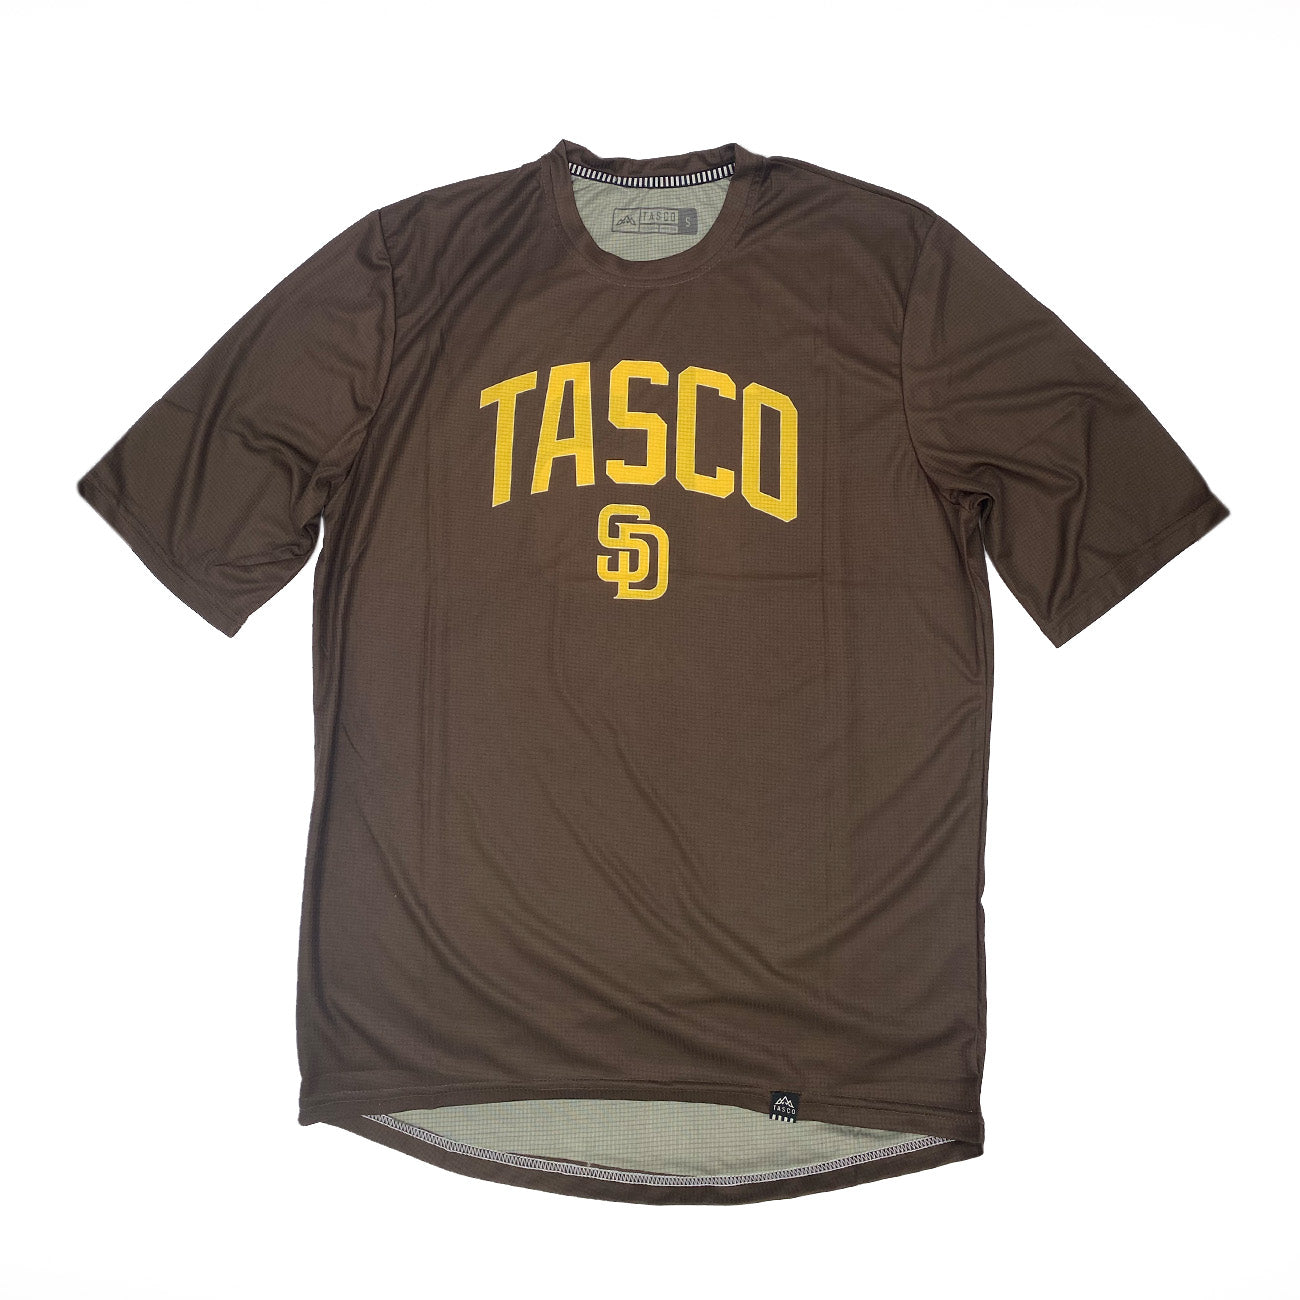 TASCO SenDiego Jersey - San Diego Padres biking jersey, brown and yellow vintage jersey colors